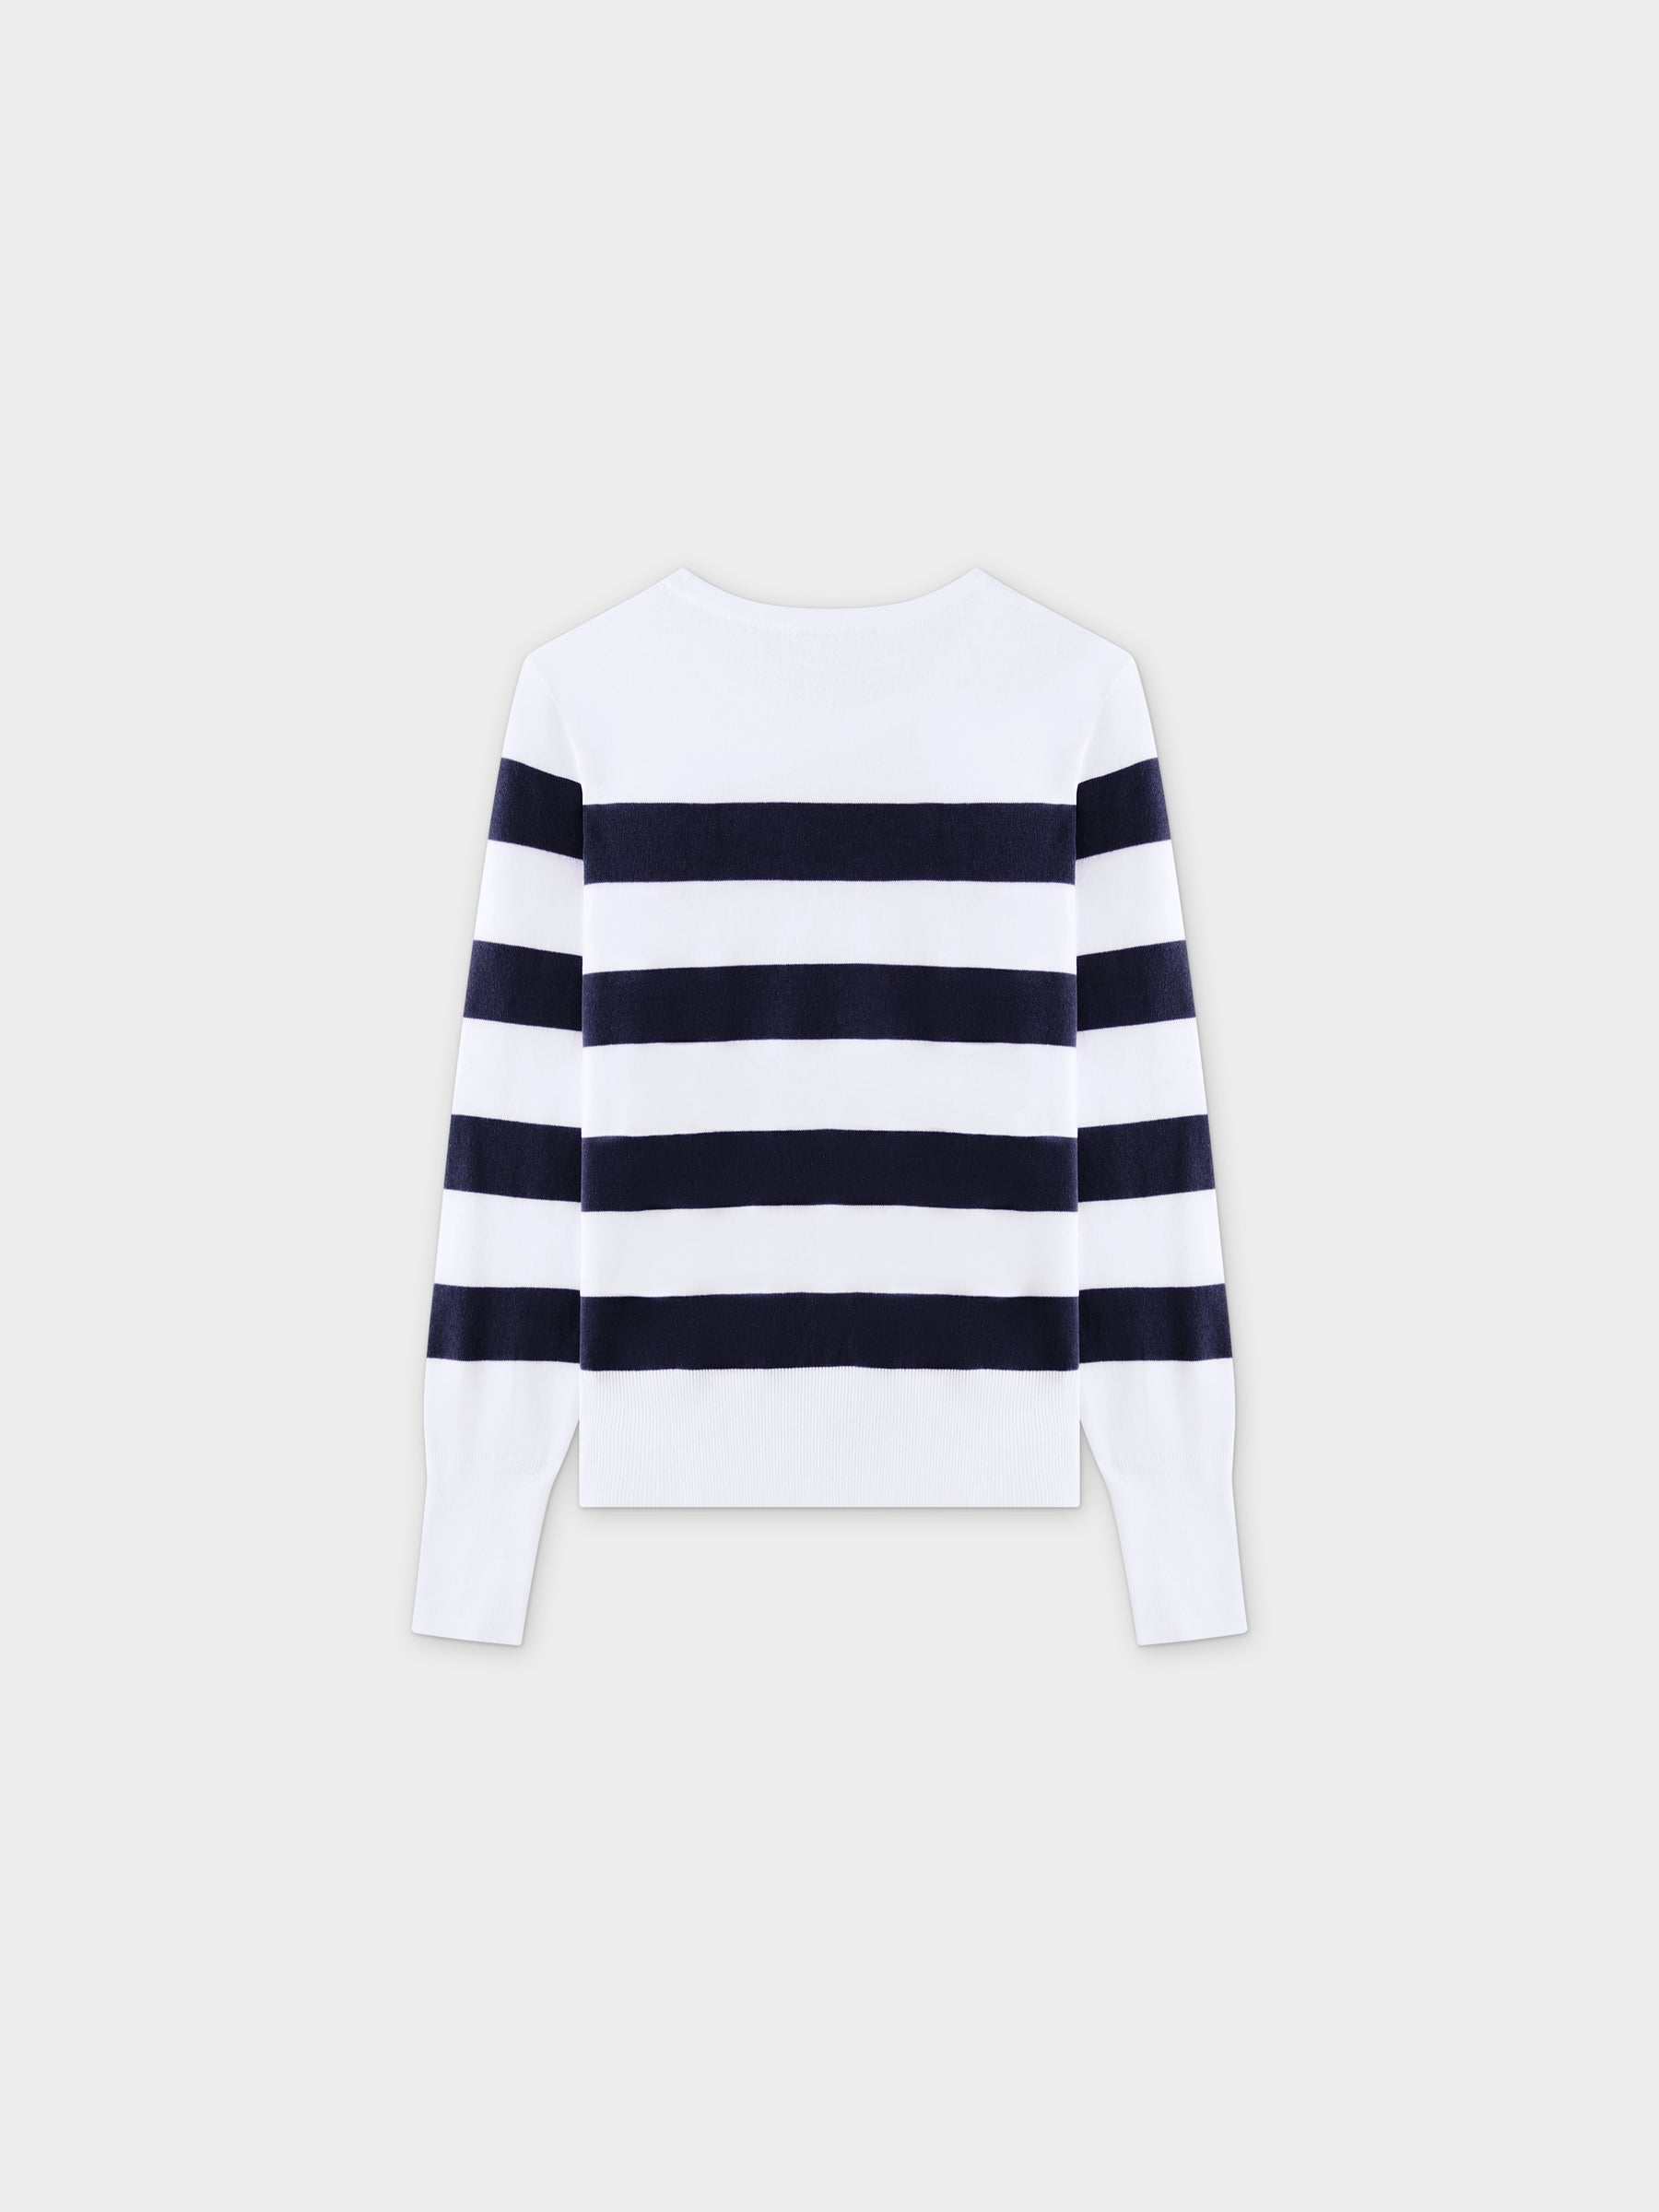 Striped Cotton Sweater-Navy